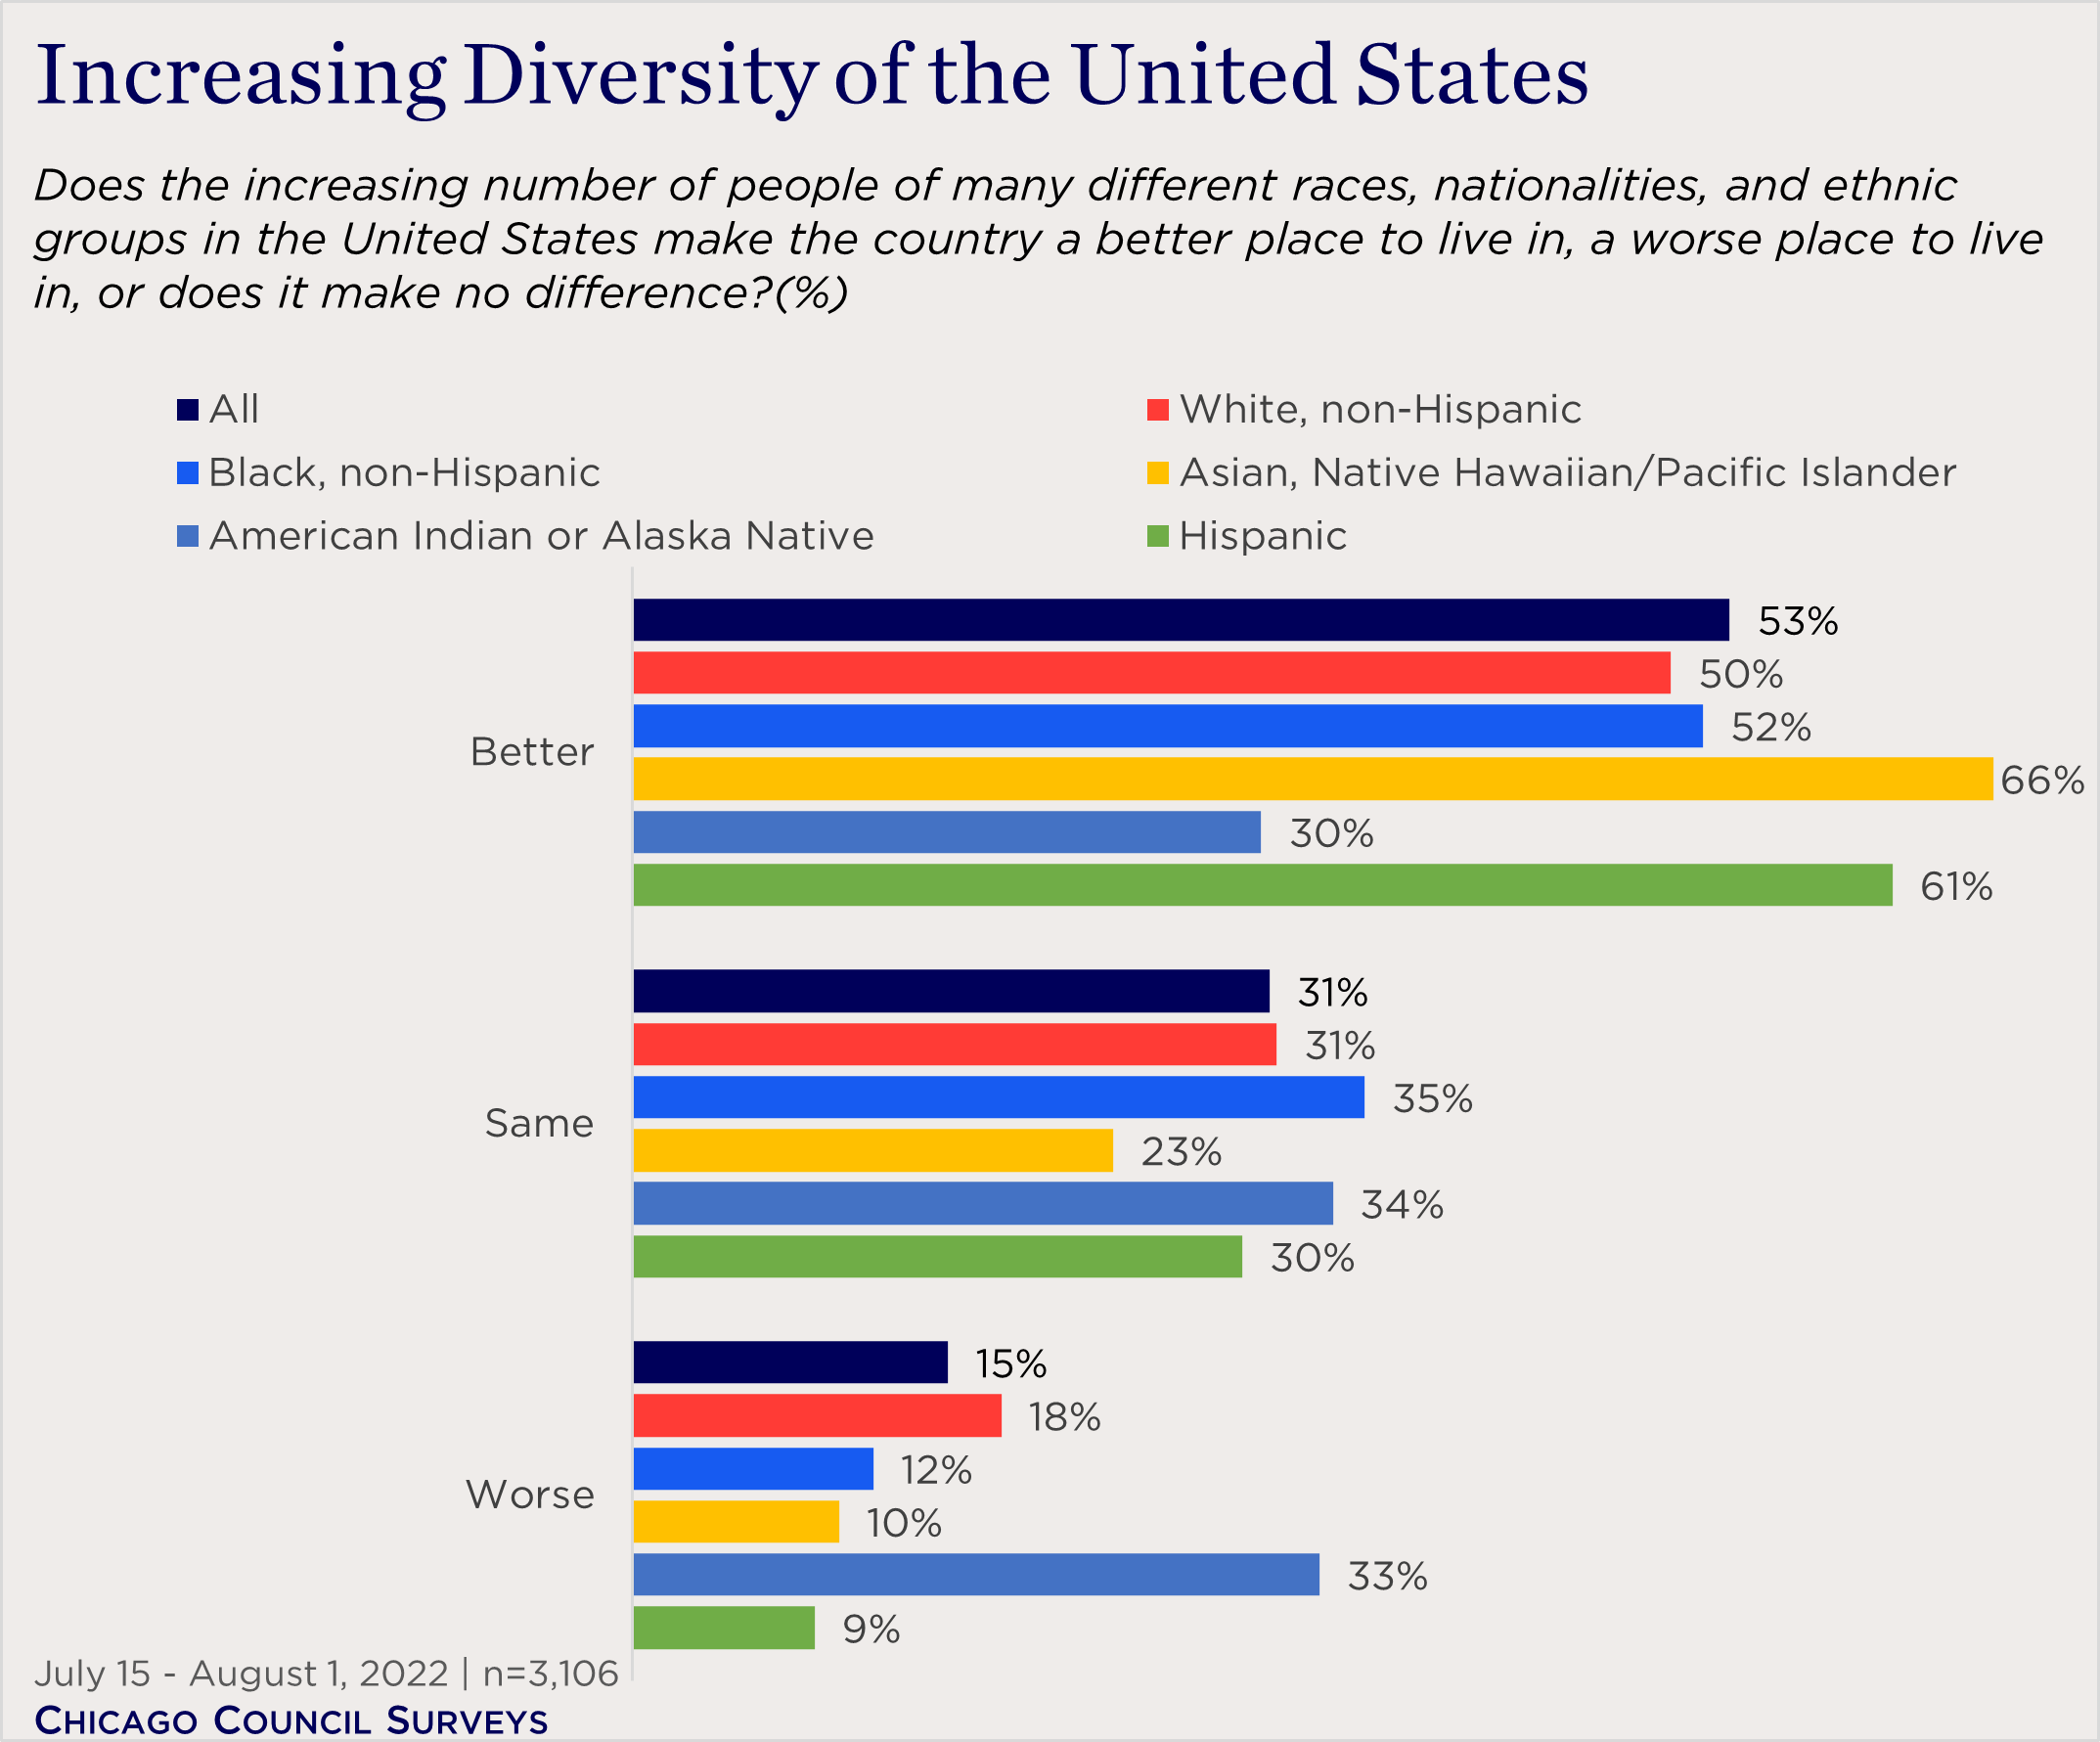 "bar chart showing views of increasing US diversity by race"